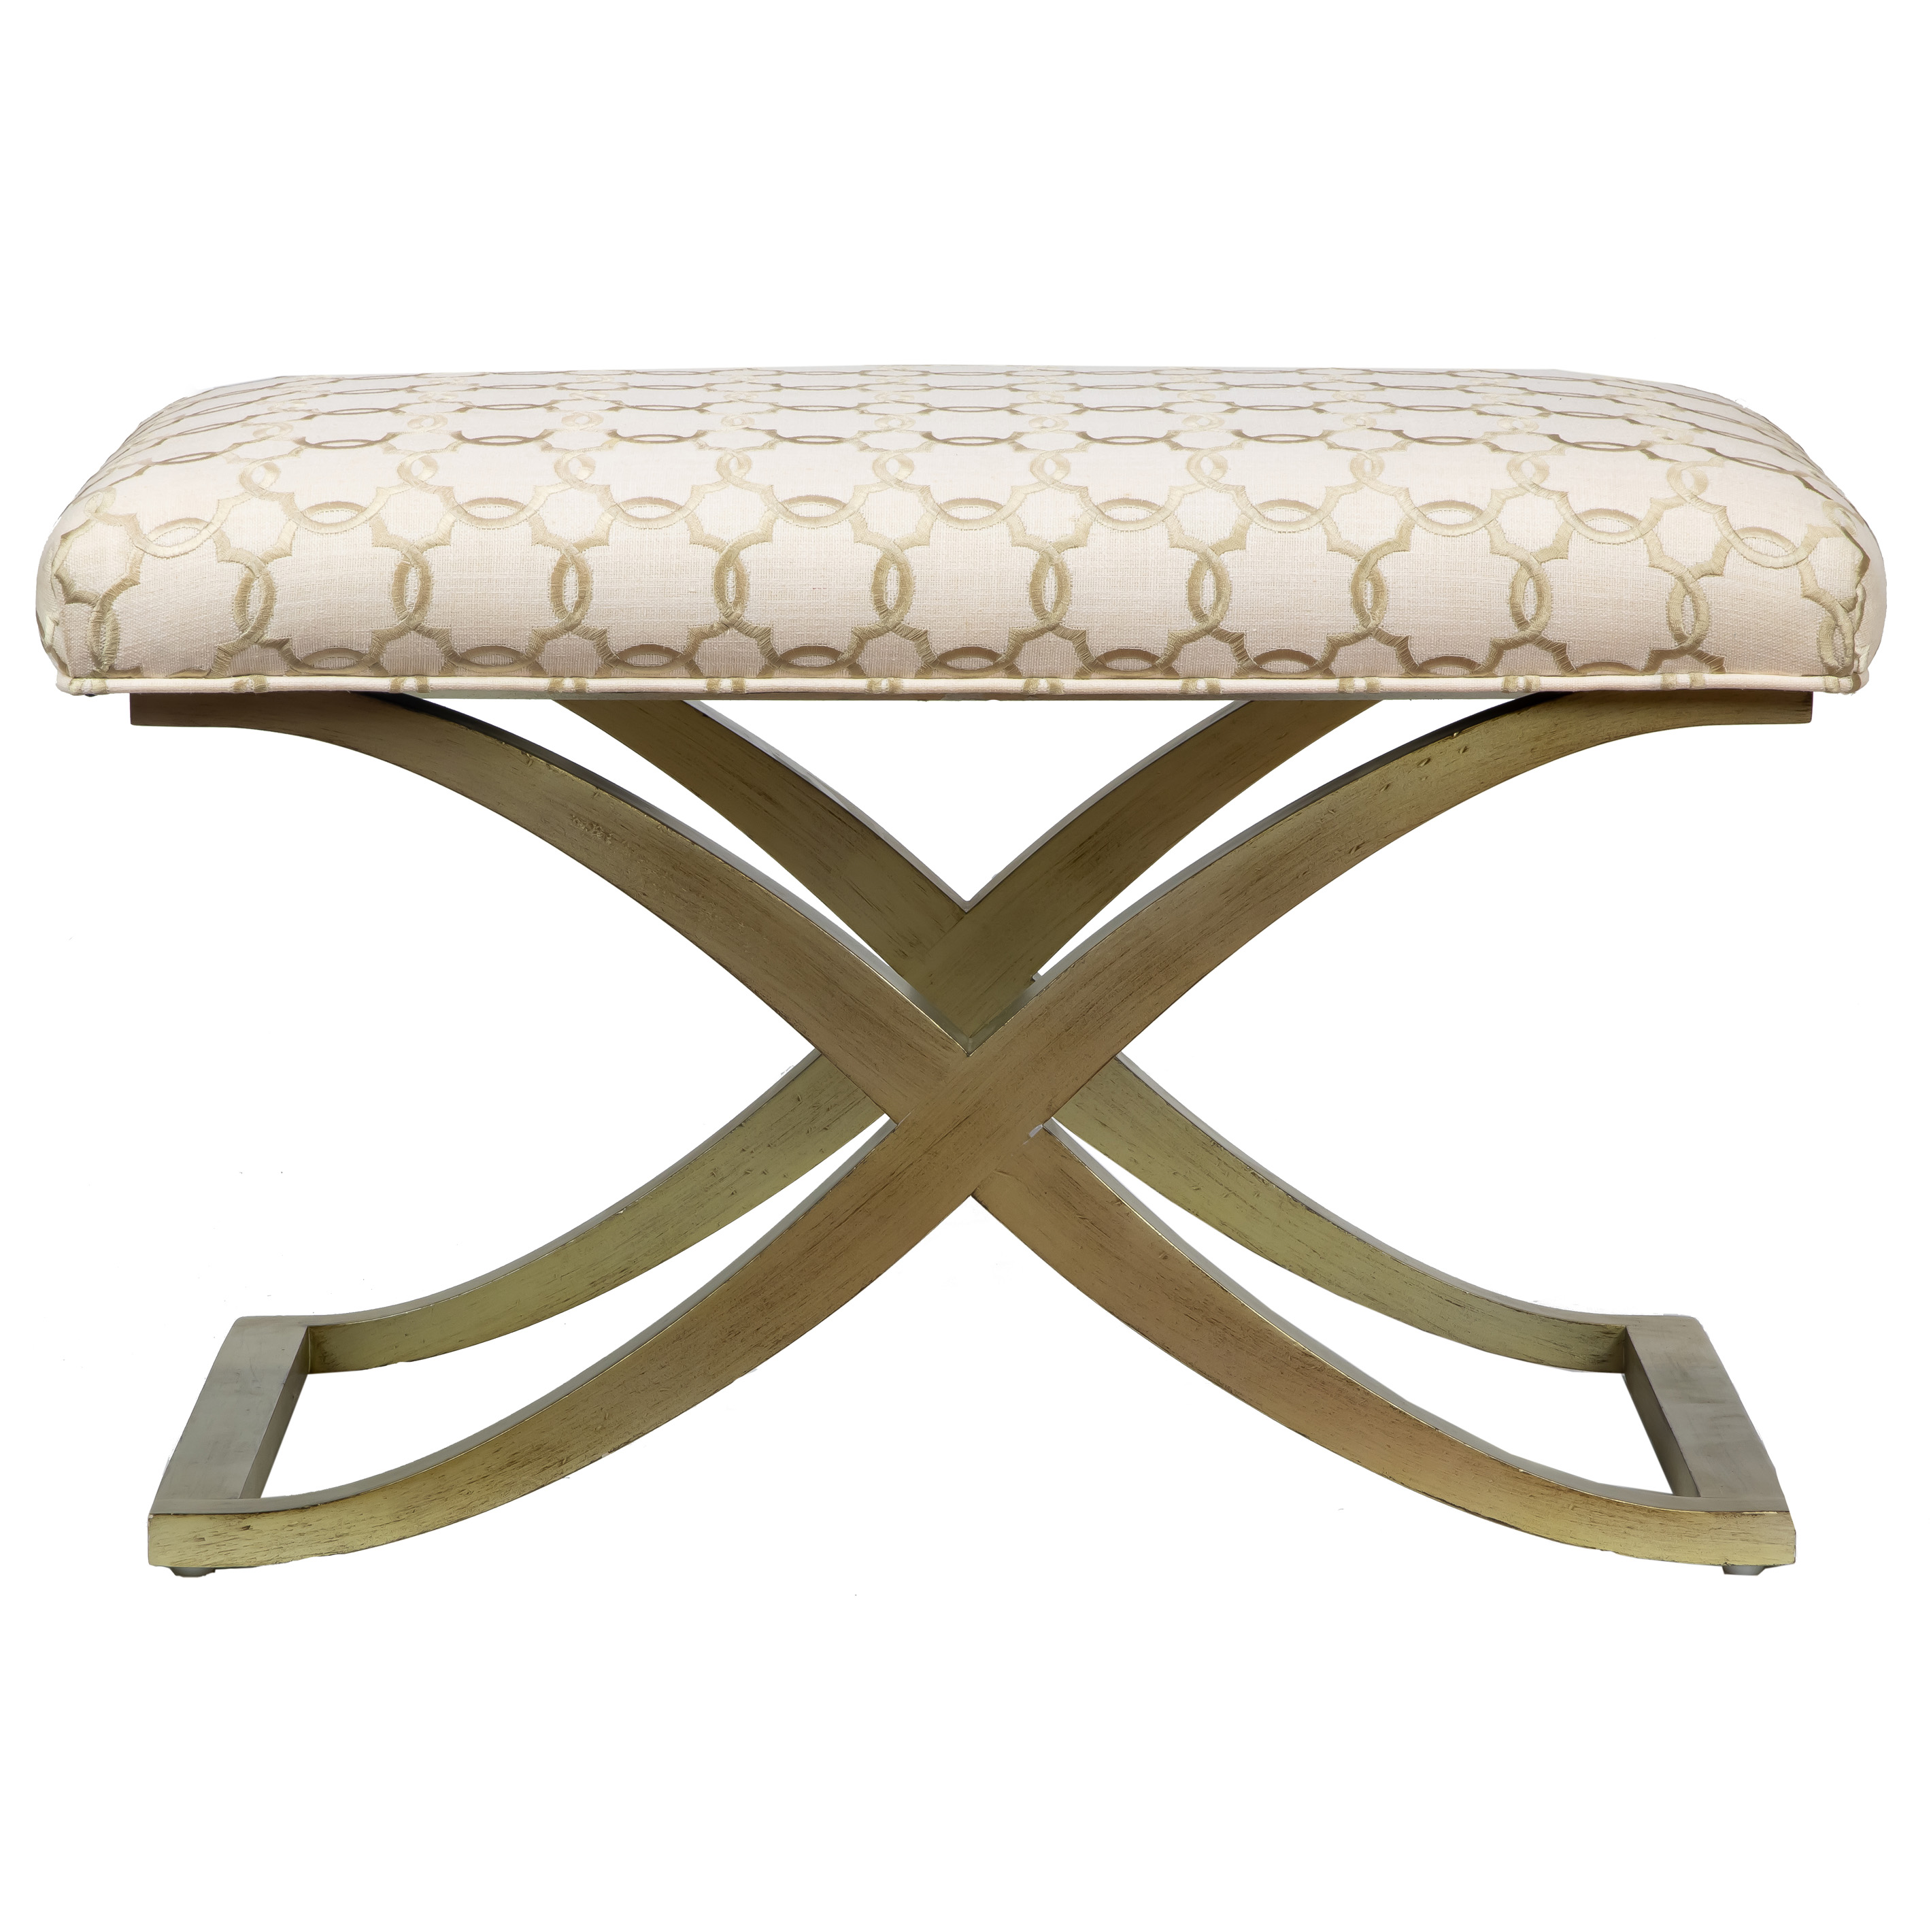 A CONTEMPORARY UPHOLSTERED BENCH